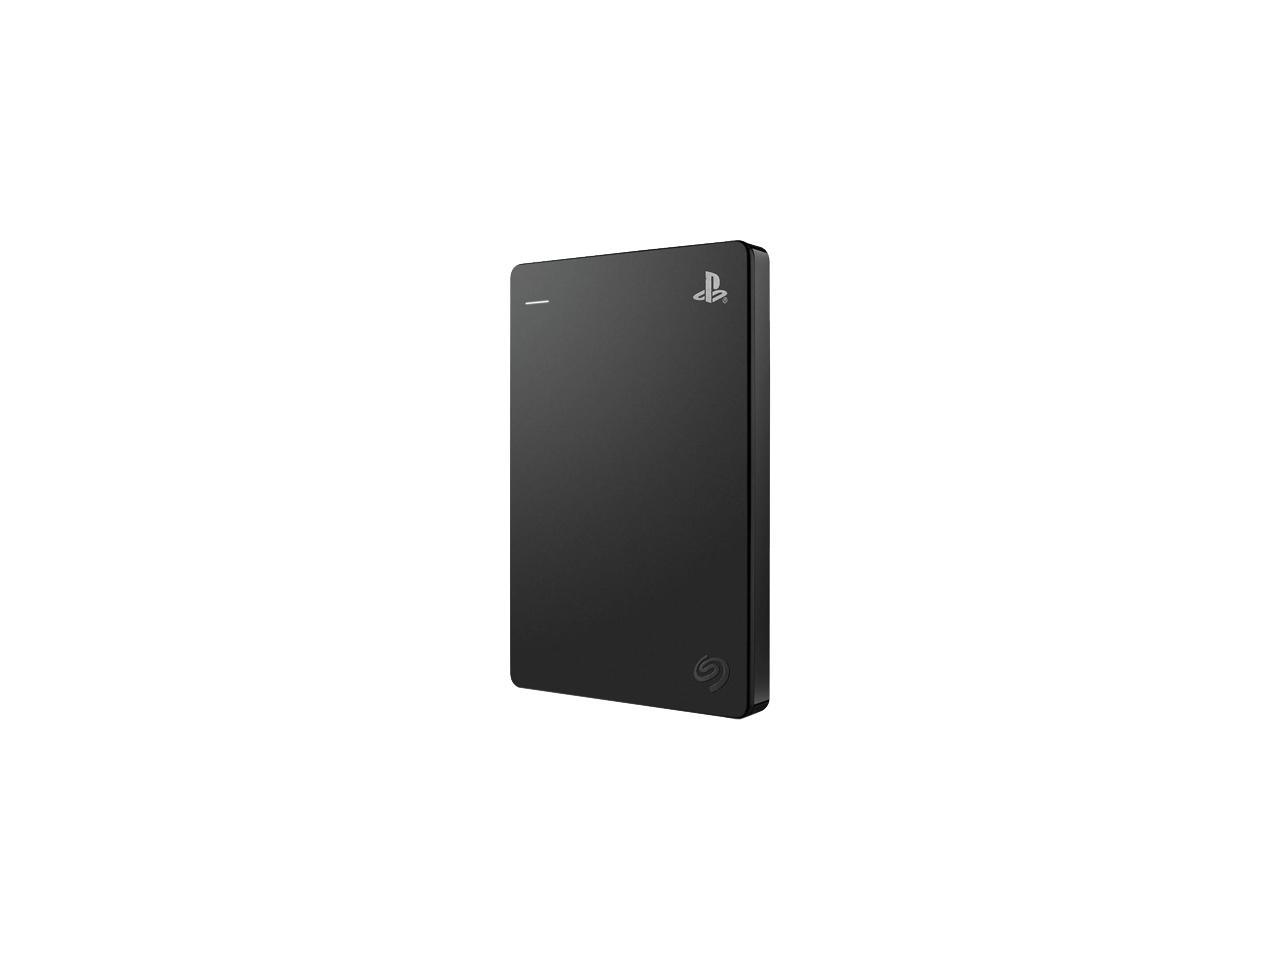 Seagate Game Drive for PS4 Systems 2TB External Hard Drive Portable USB 3.0 HDD, Officially Licensed (STGD2000100) - image 1 of 7